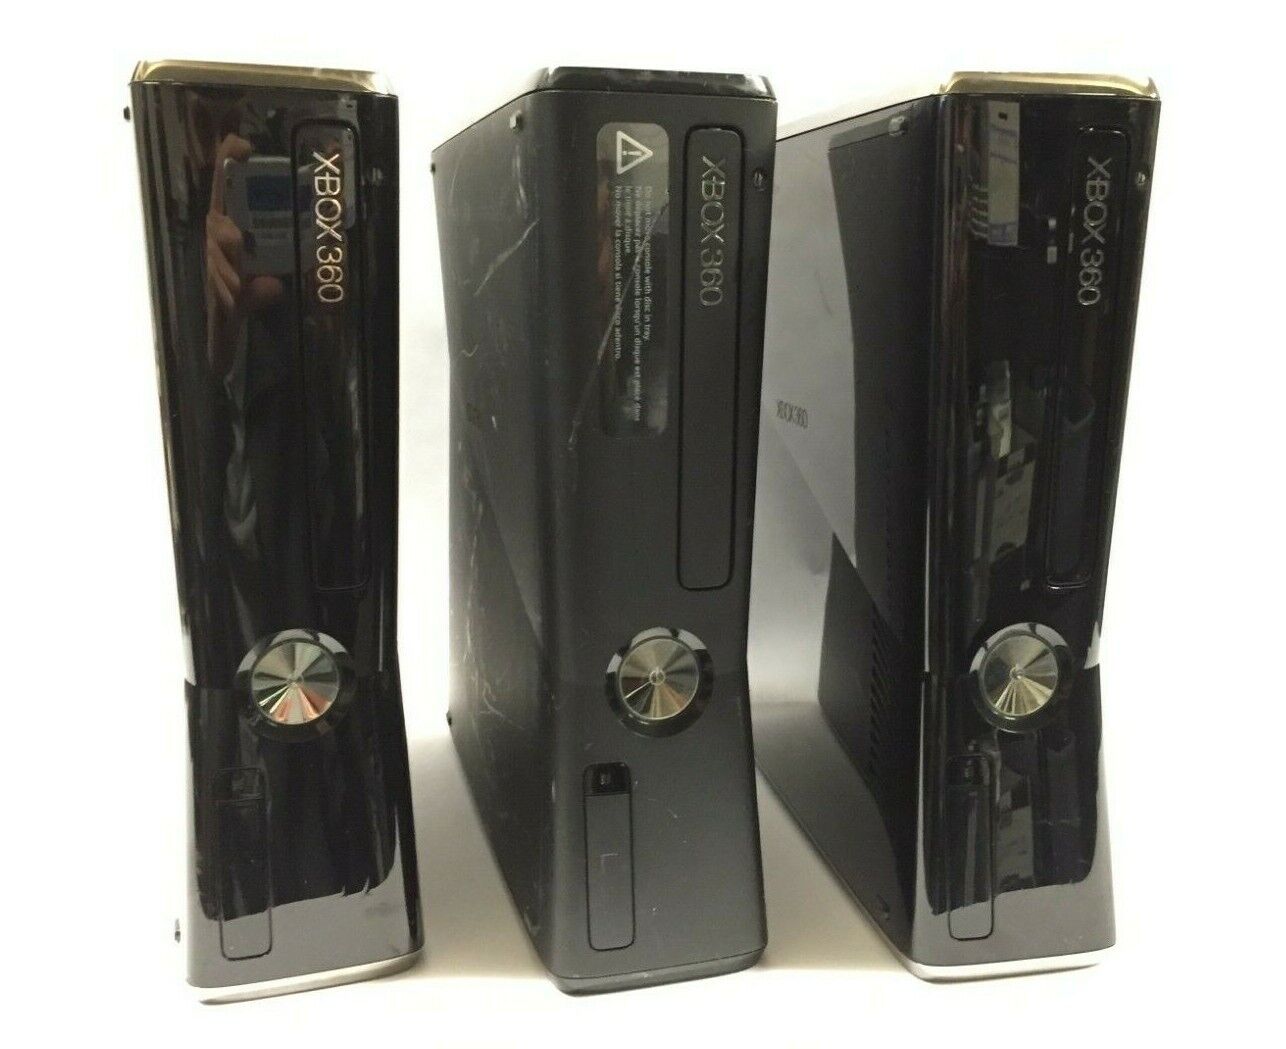 Lot of 3 Xbox 360 S Model 1439 250GB, Consoles Only, Tested, Working, Used Microsoft Microsoft Xbox 360 S